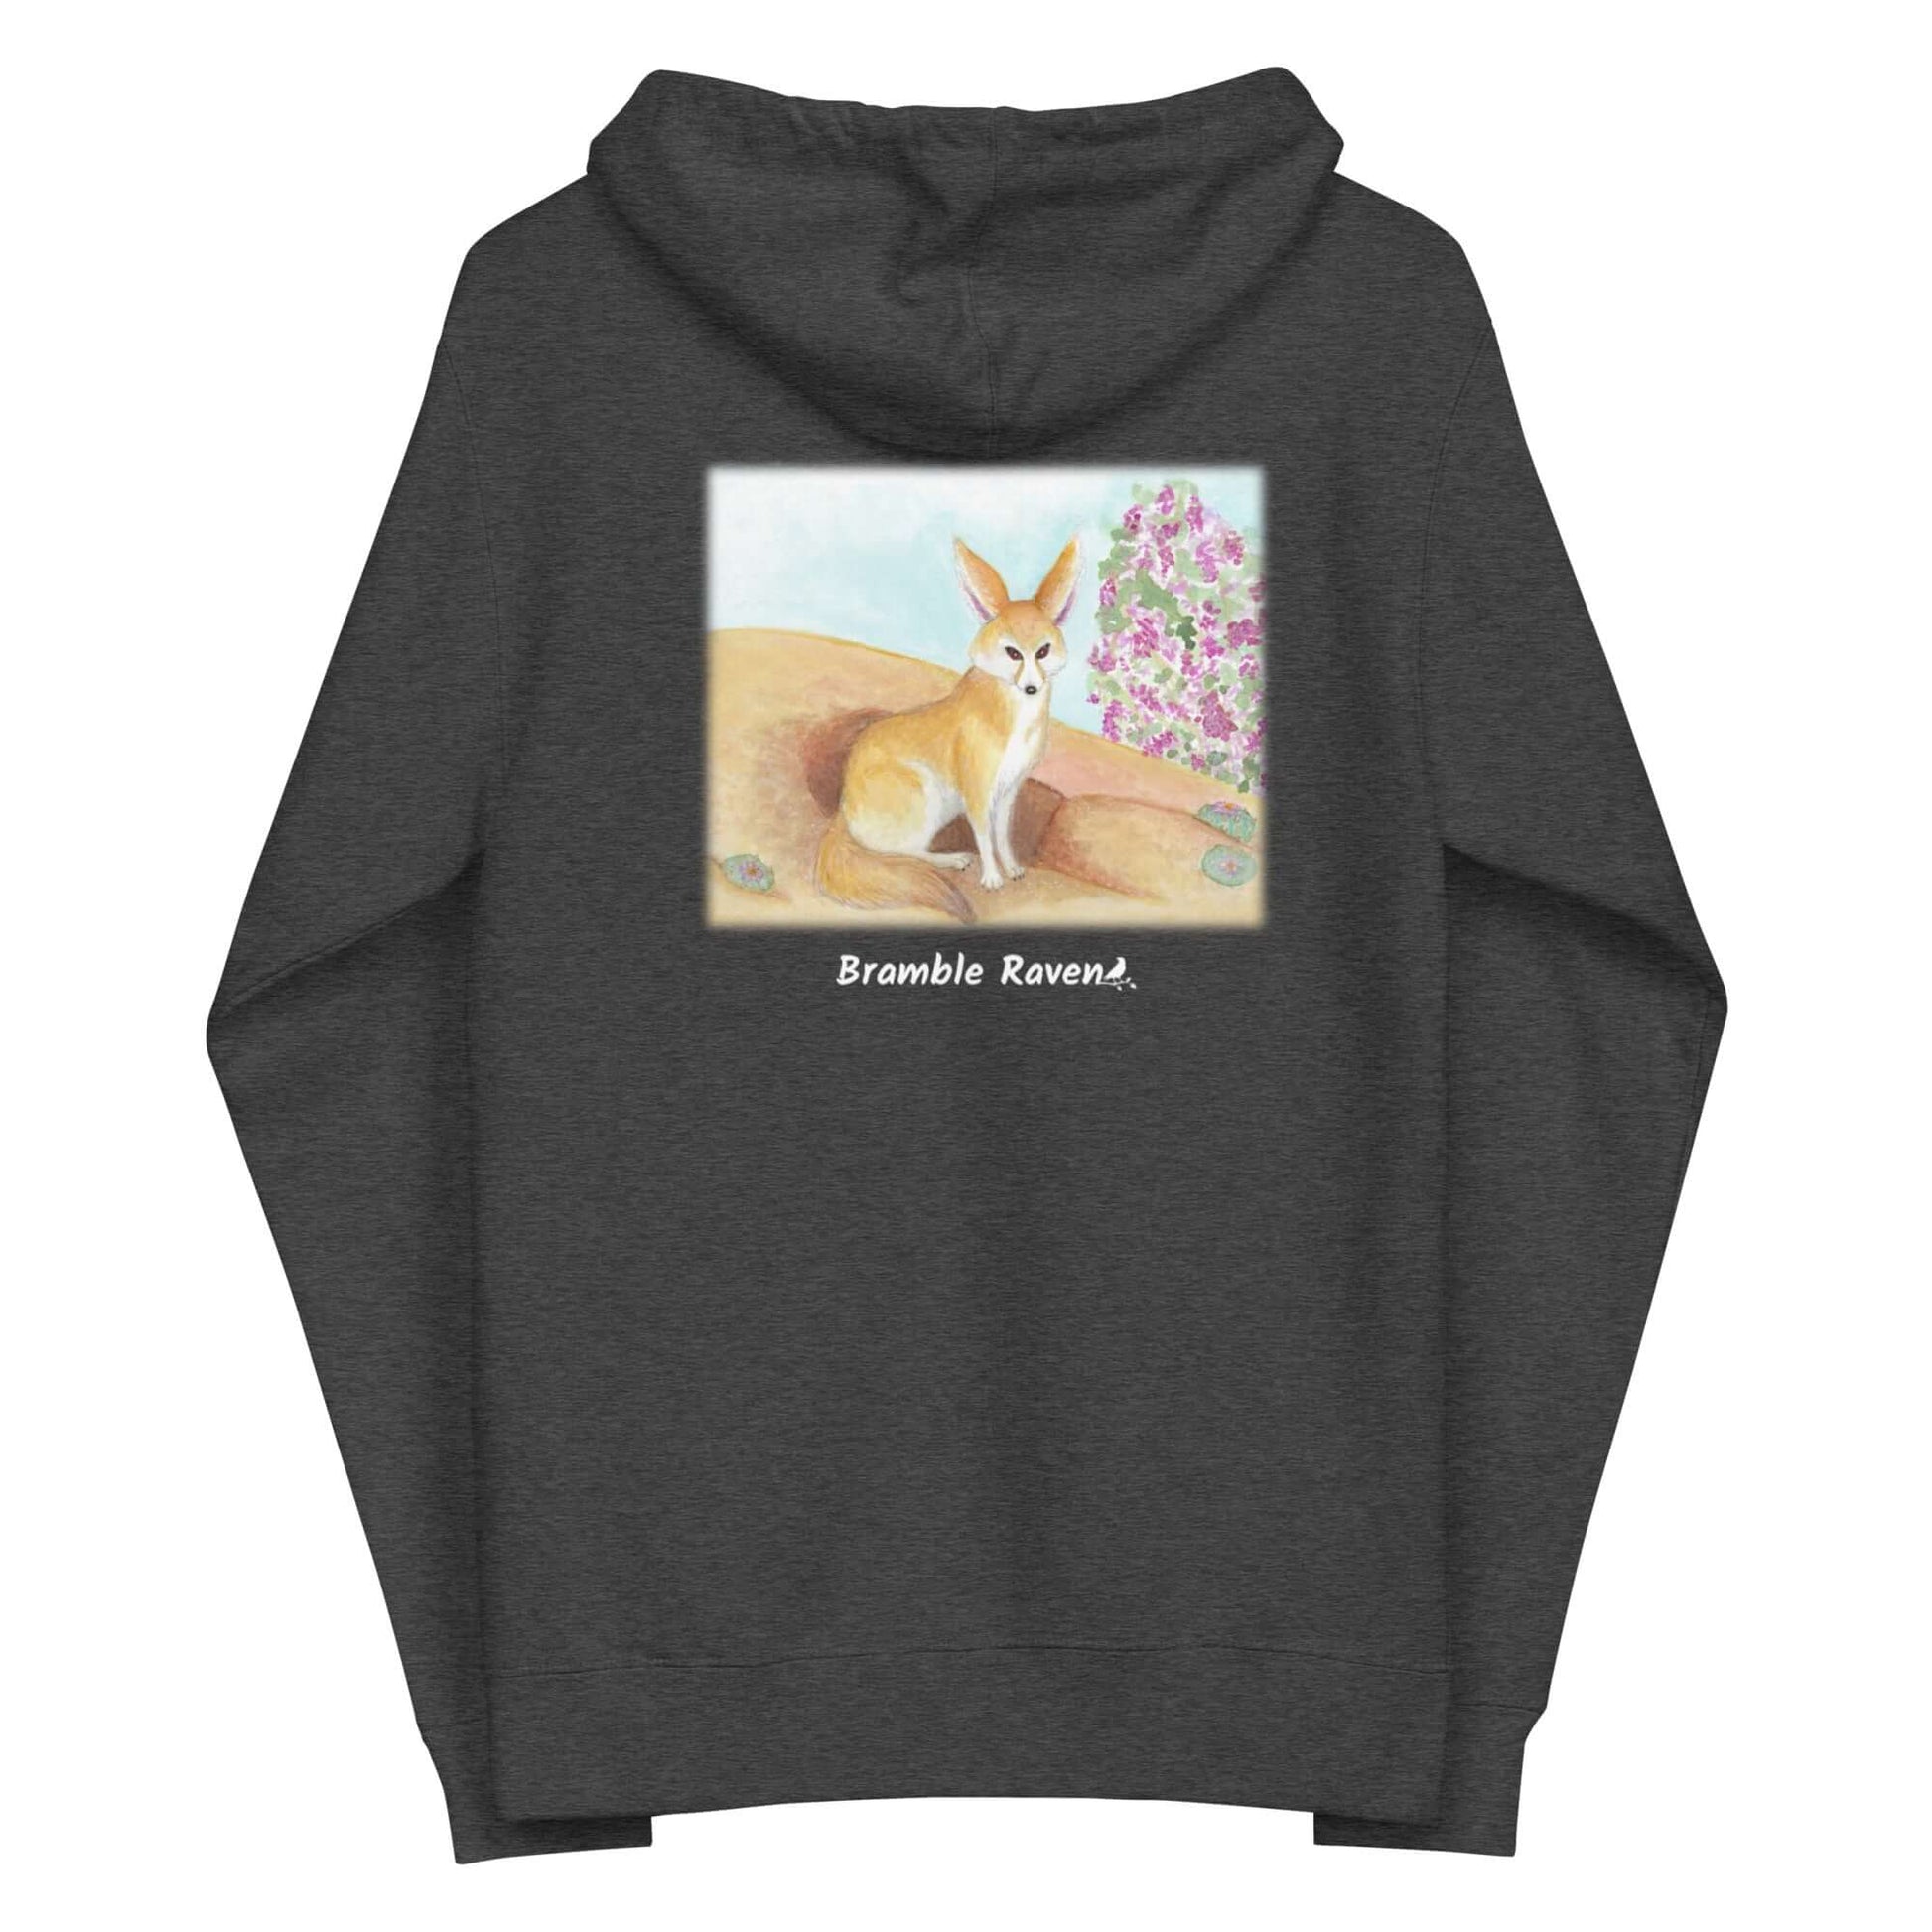 Unisex fleece-lined zip-up charcoal heather grey colored hoodie. Features original watercolor painting of a fennec fox in the desert on the back of the hoodie.